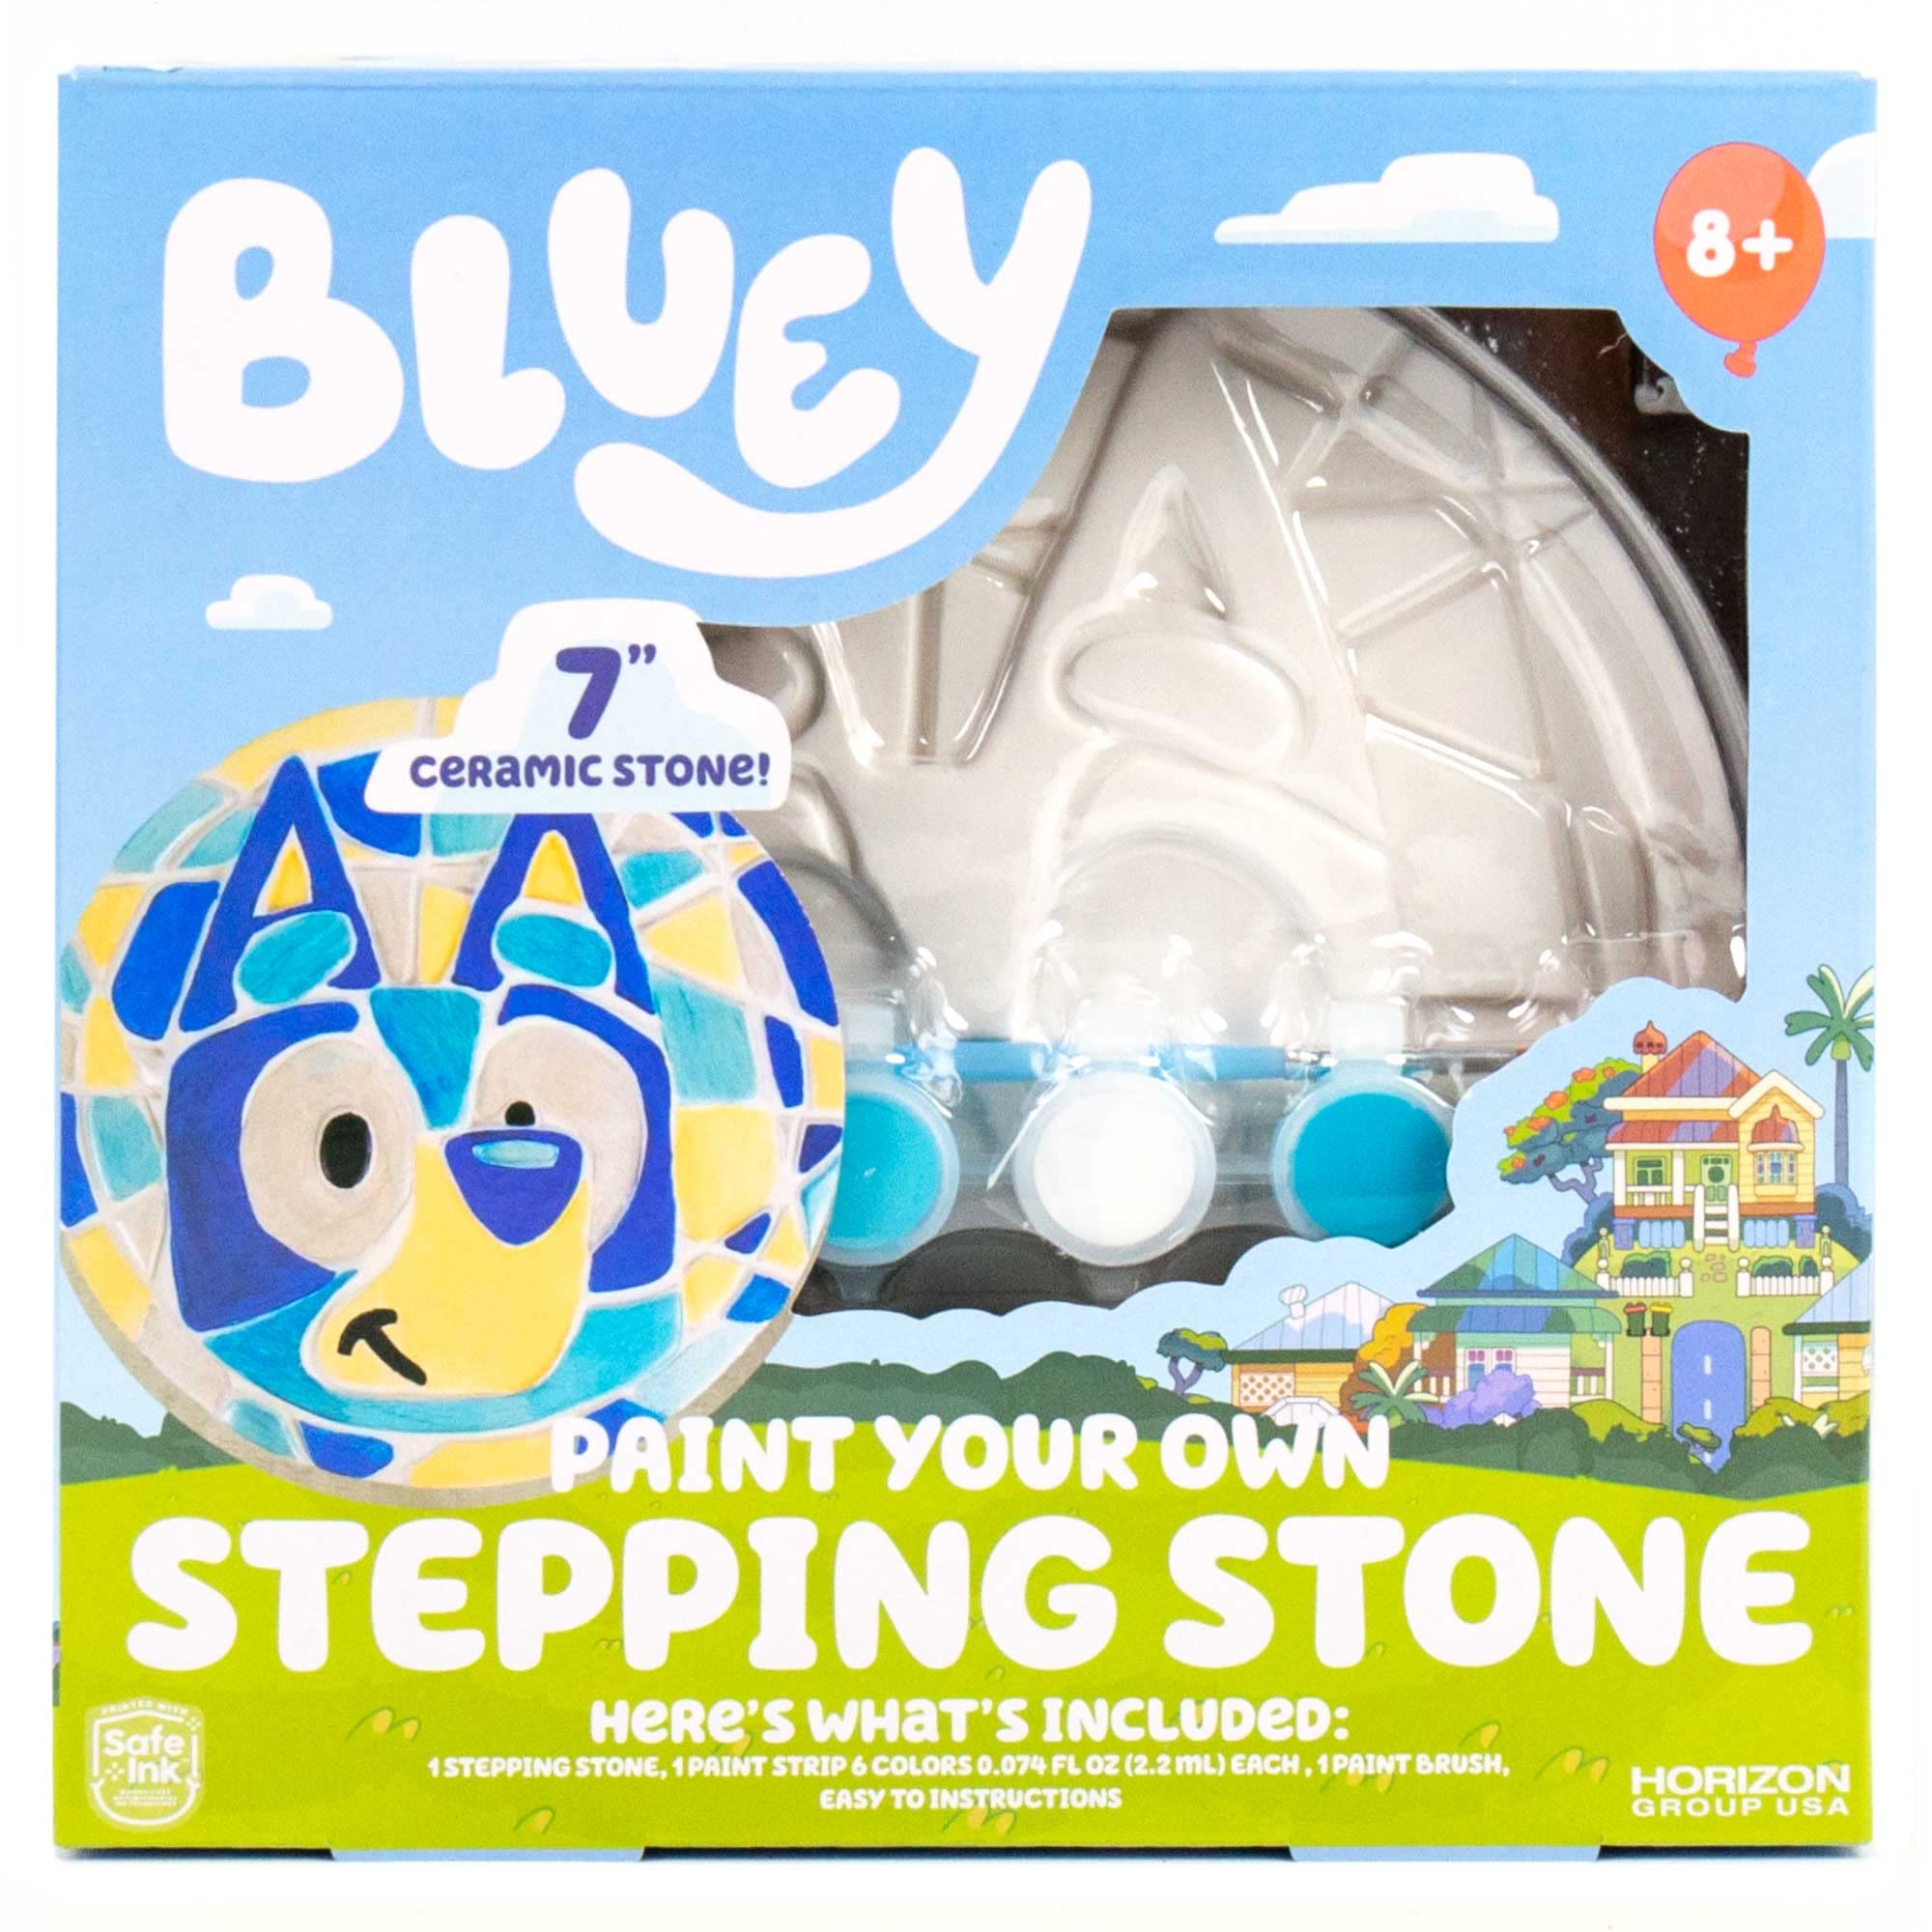 Bluey Paint Your Own Stepping Stone, Design 7 DIY Stone Art, Fun Kit for Kids, Less Mess Paintable Stones Art Set, Great Summer Activity Kids Ages 8, 9, 10, 11